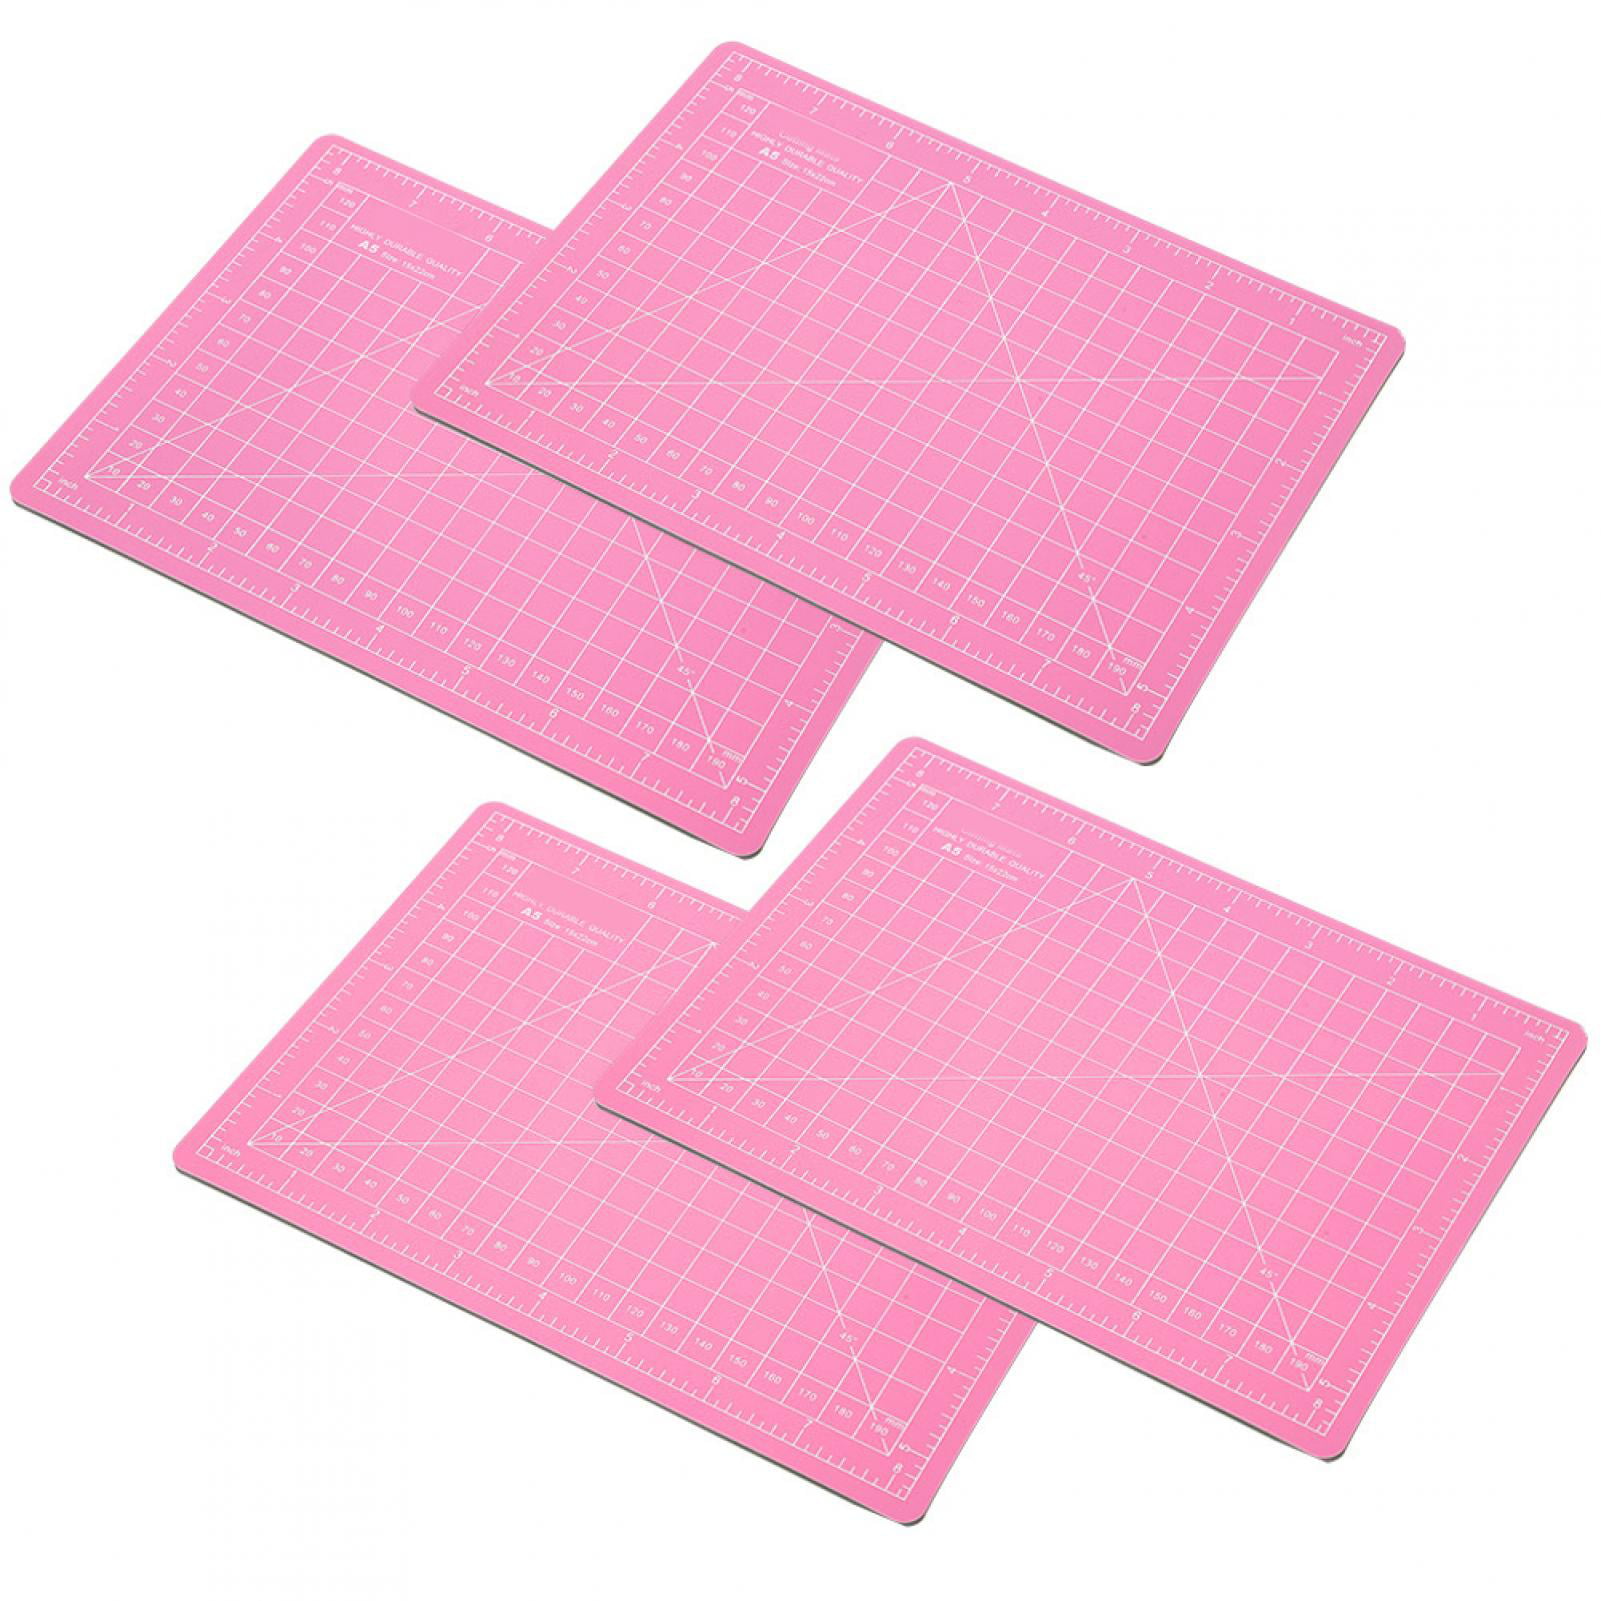 Pvc Pink Model Cut Pad 22 X 15Cm 8.7 X 5.9In Writing For Negative Film Cutting Cutting Mat Model Cutting Mat